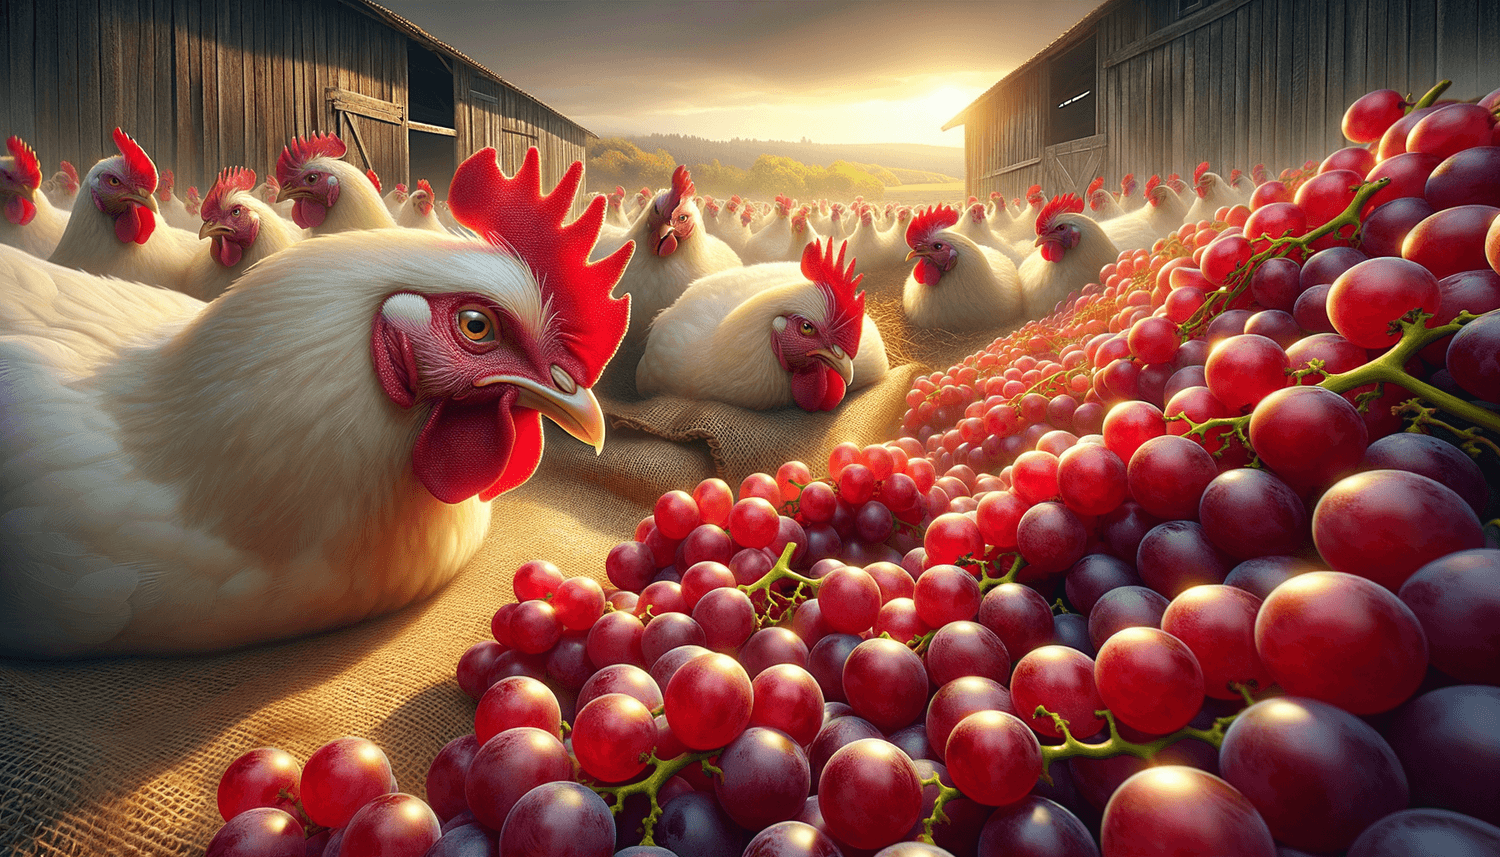 Can Chickens Eat Red Grapes?